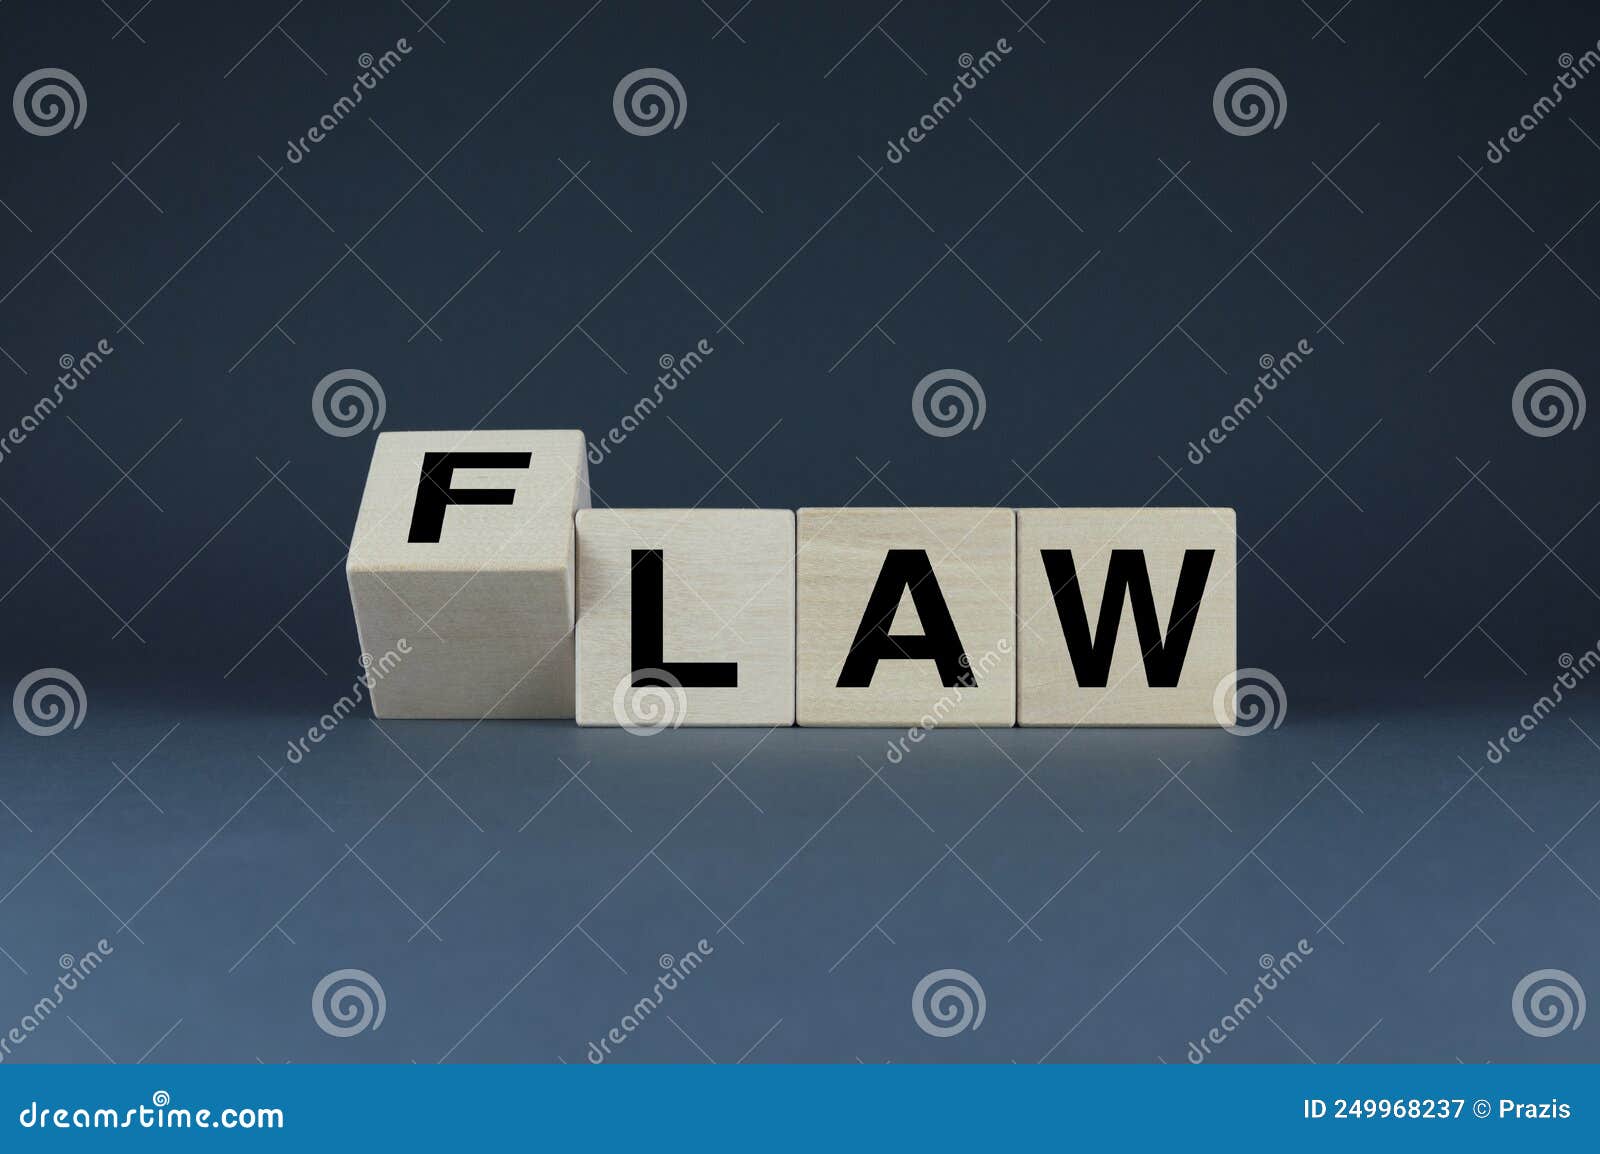 law or flaw. cubes form the words law or flaw